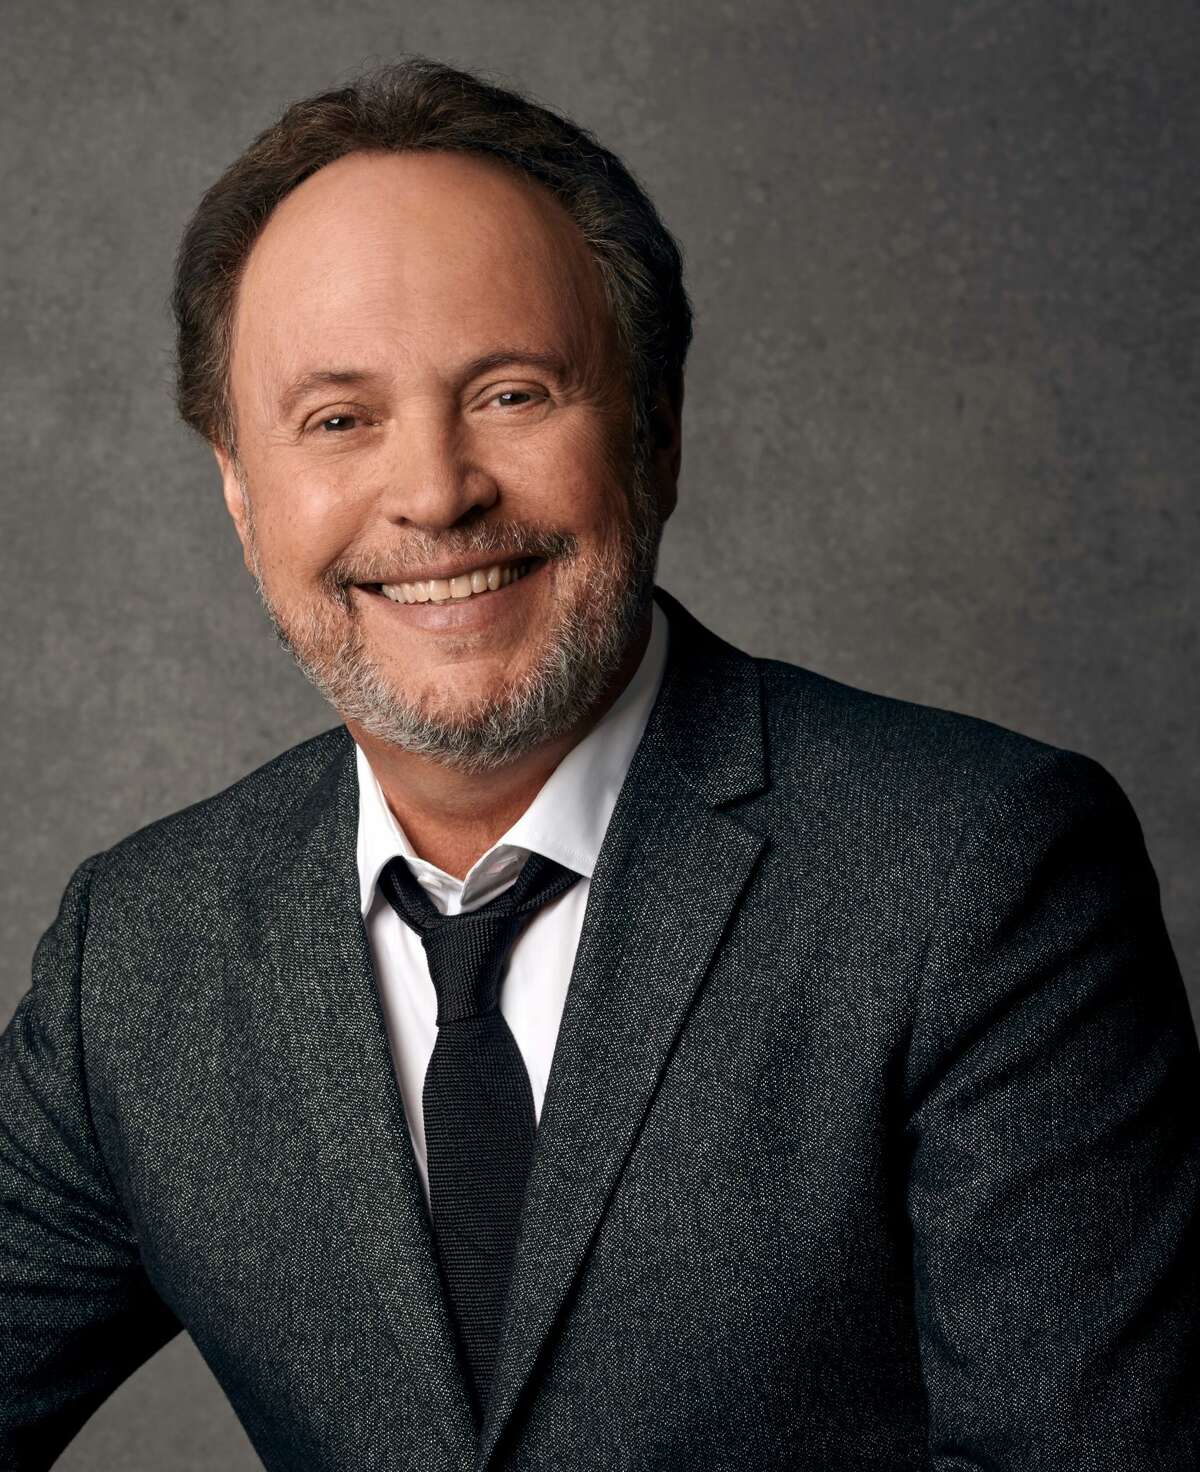 Billy Crystal will appear in "Mr. Saturday Night," a new stage musical adaptation of his 1992 movie of the same name, at Barrington Stage Company in Pittsfield, Mass., from Oct, 23 to 30.